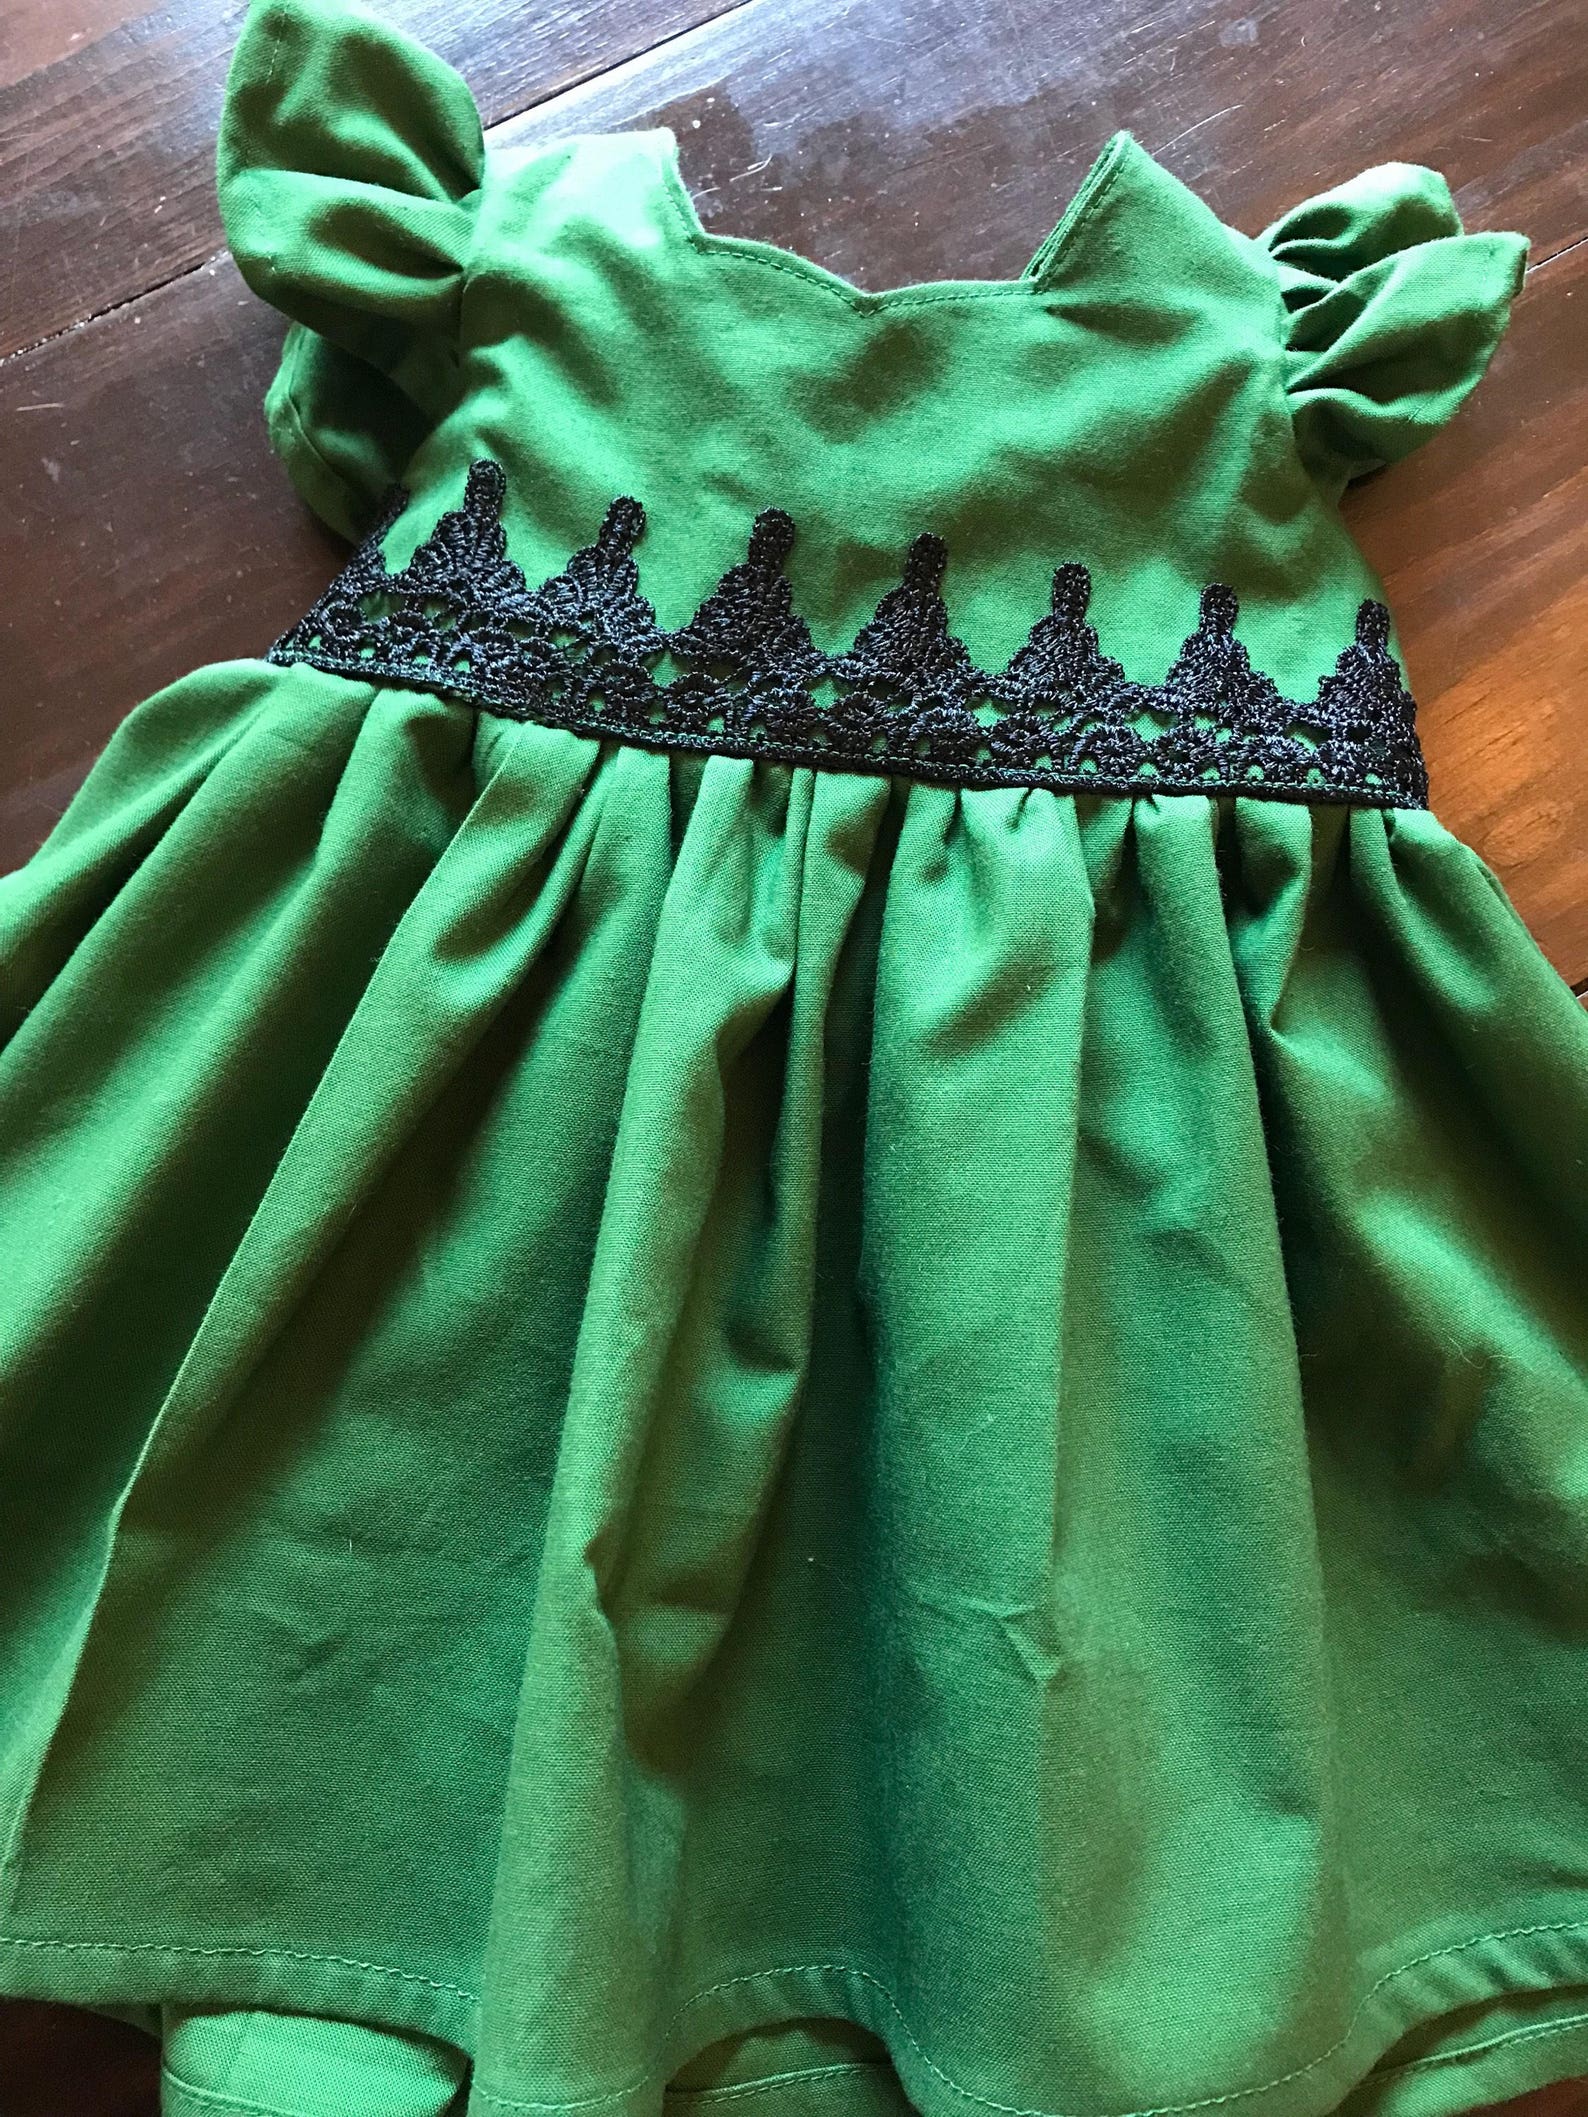 Ivy Dress Solid emarald green cotton dress with sweetheart | Etsy